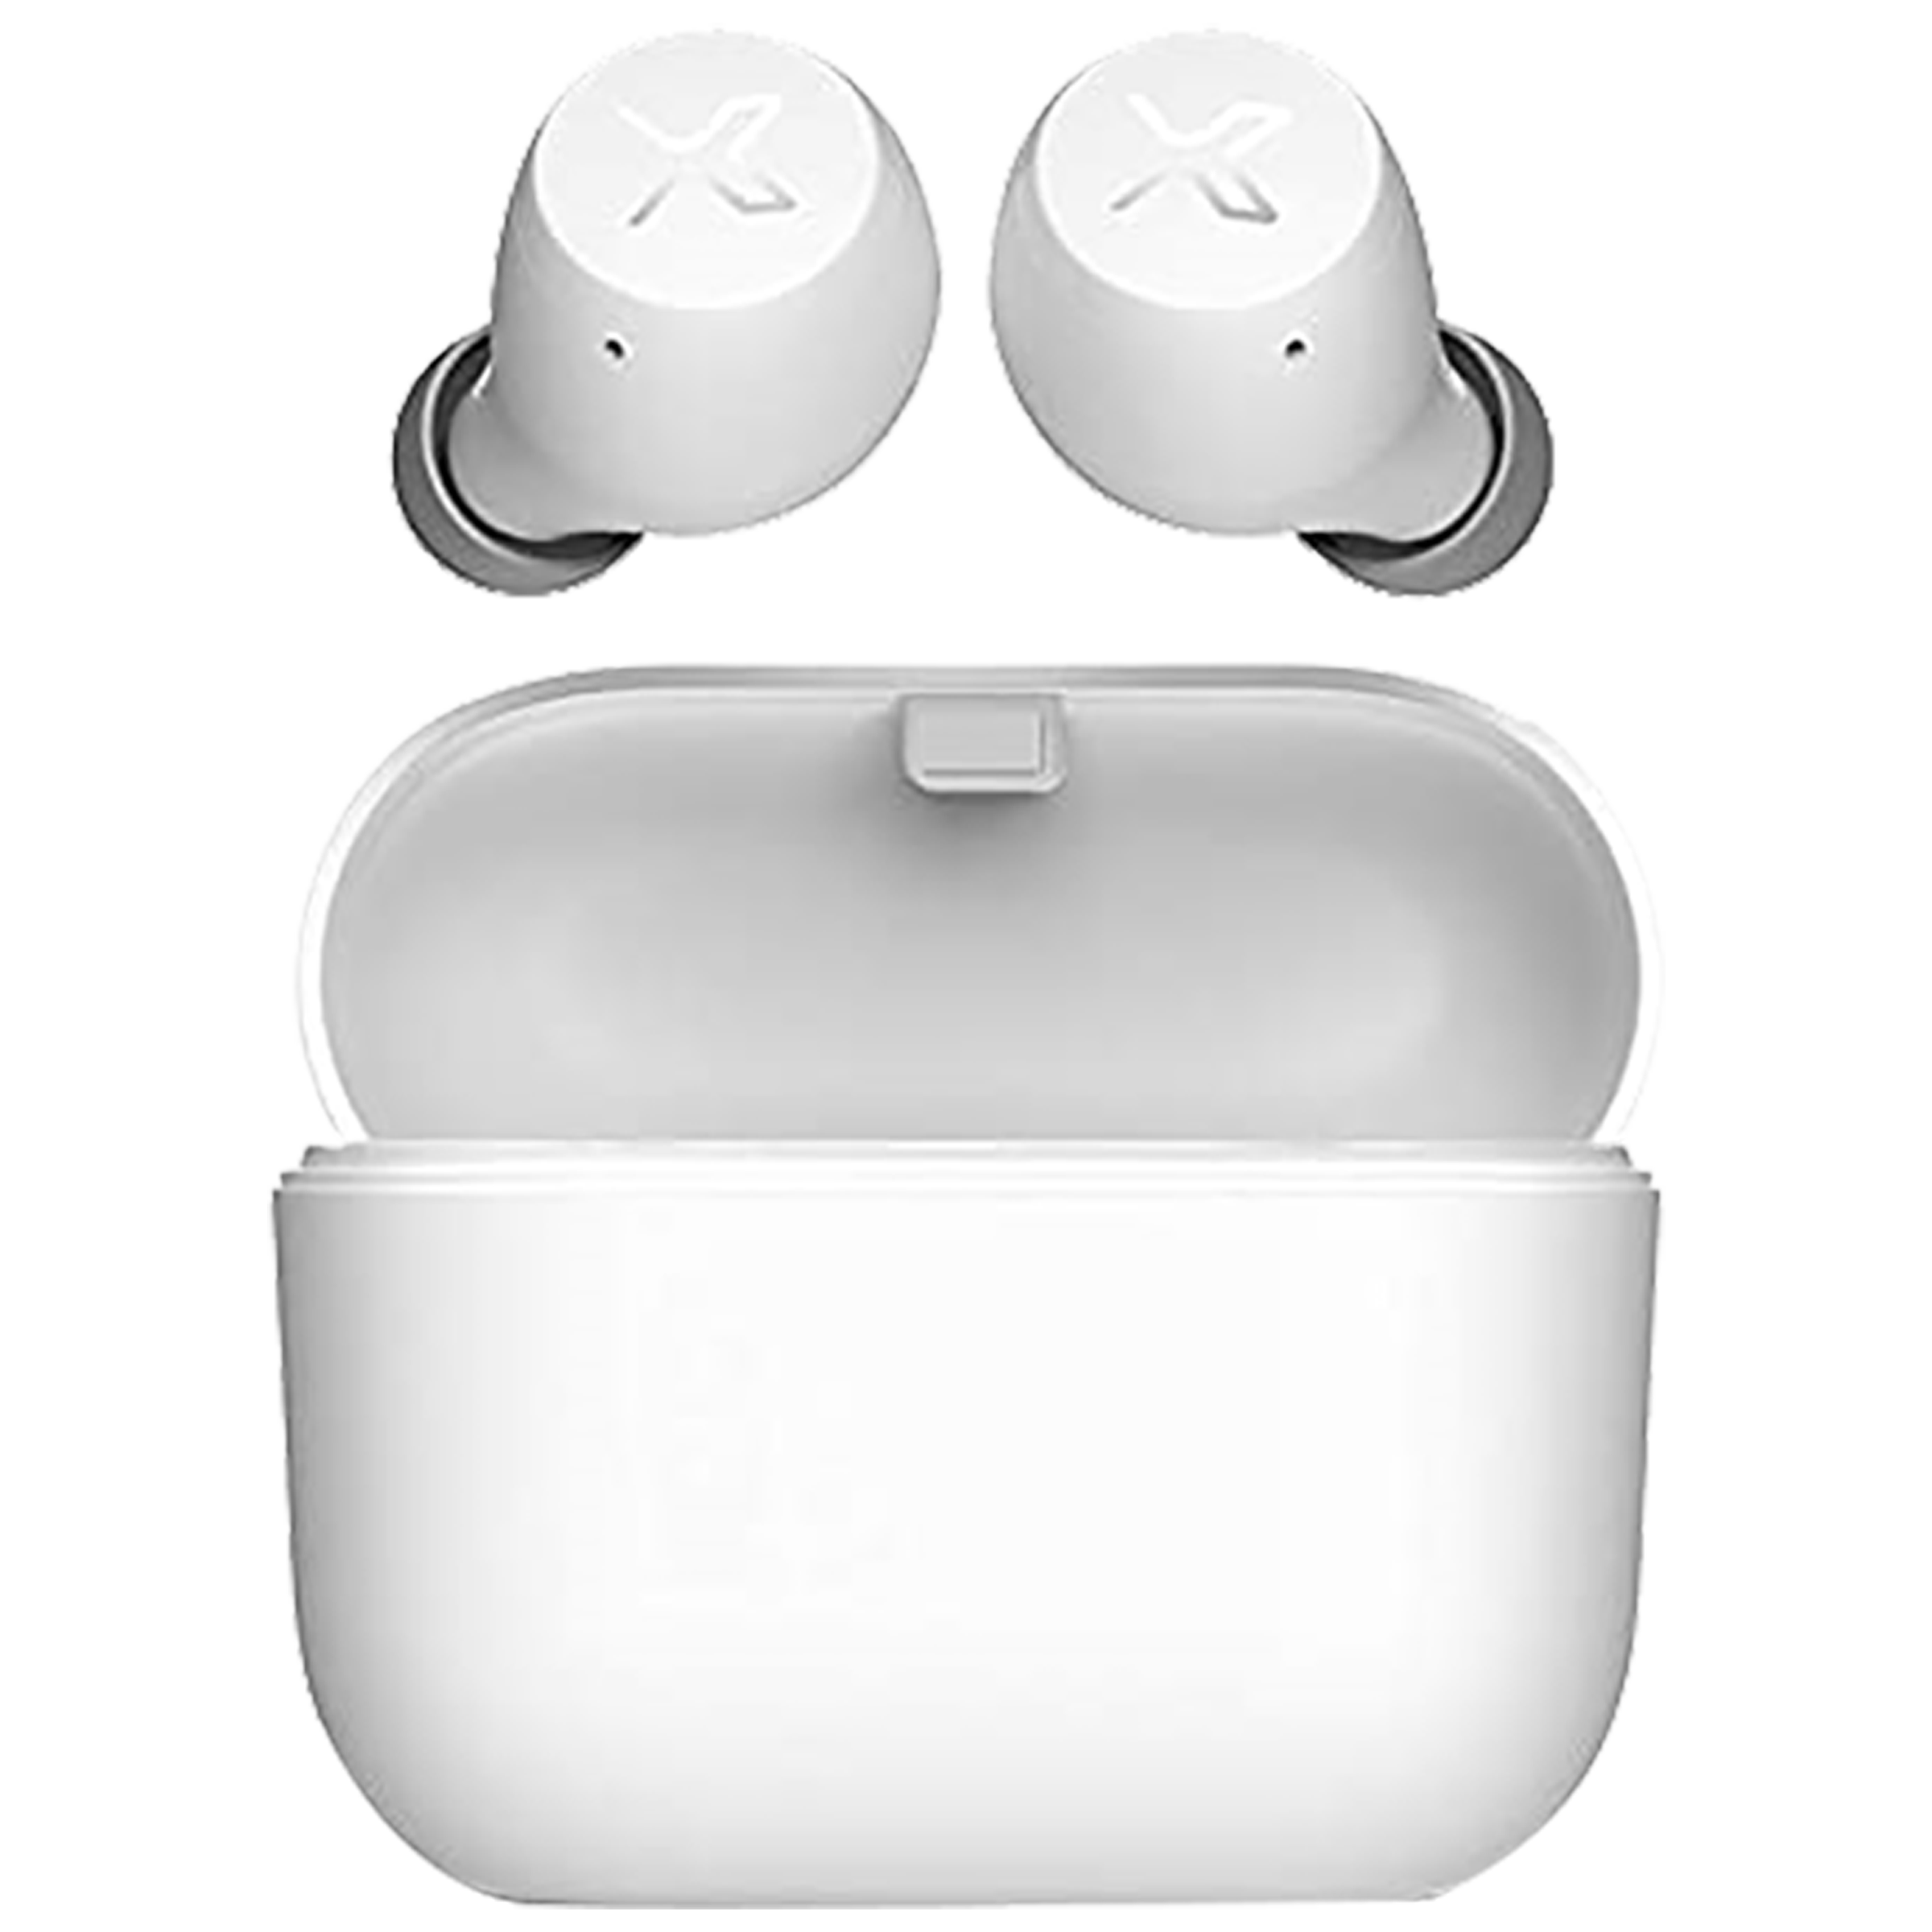 Edifier X3 In-Ear Active Noise Cancellation Truly Wireless Earbuds With Mic (Bluetooth 5.0, IPX5 Splashproof, White)_1